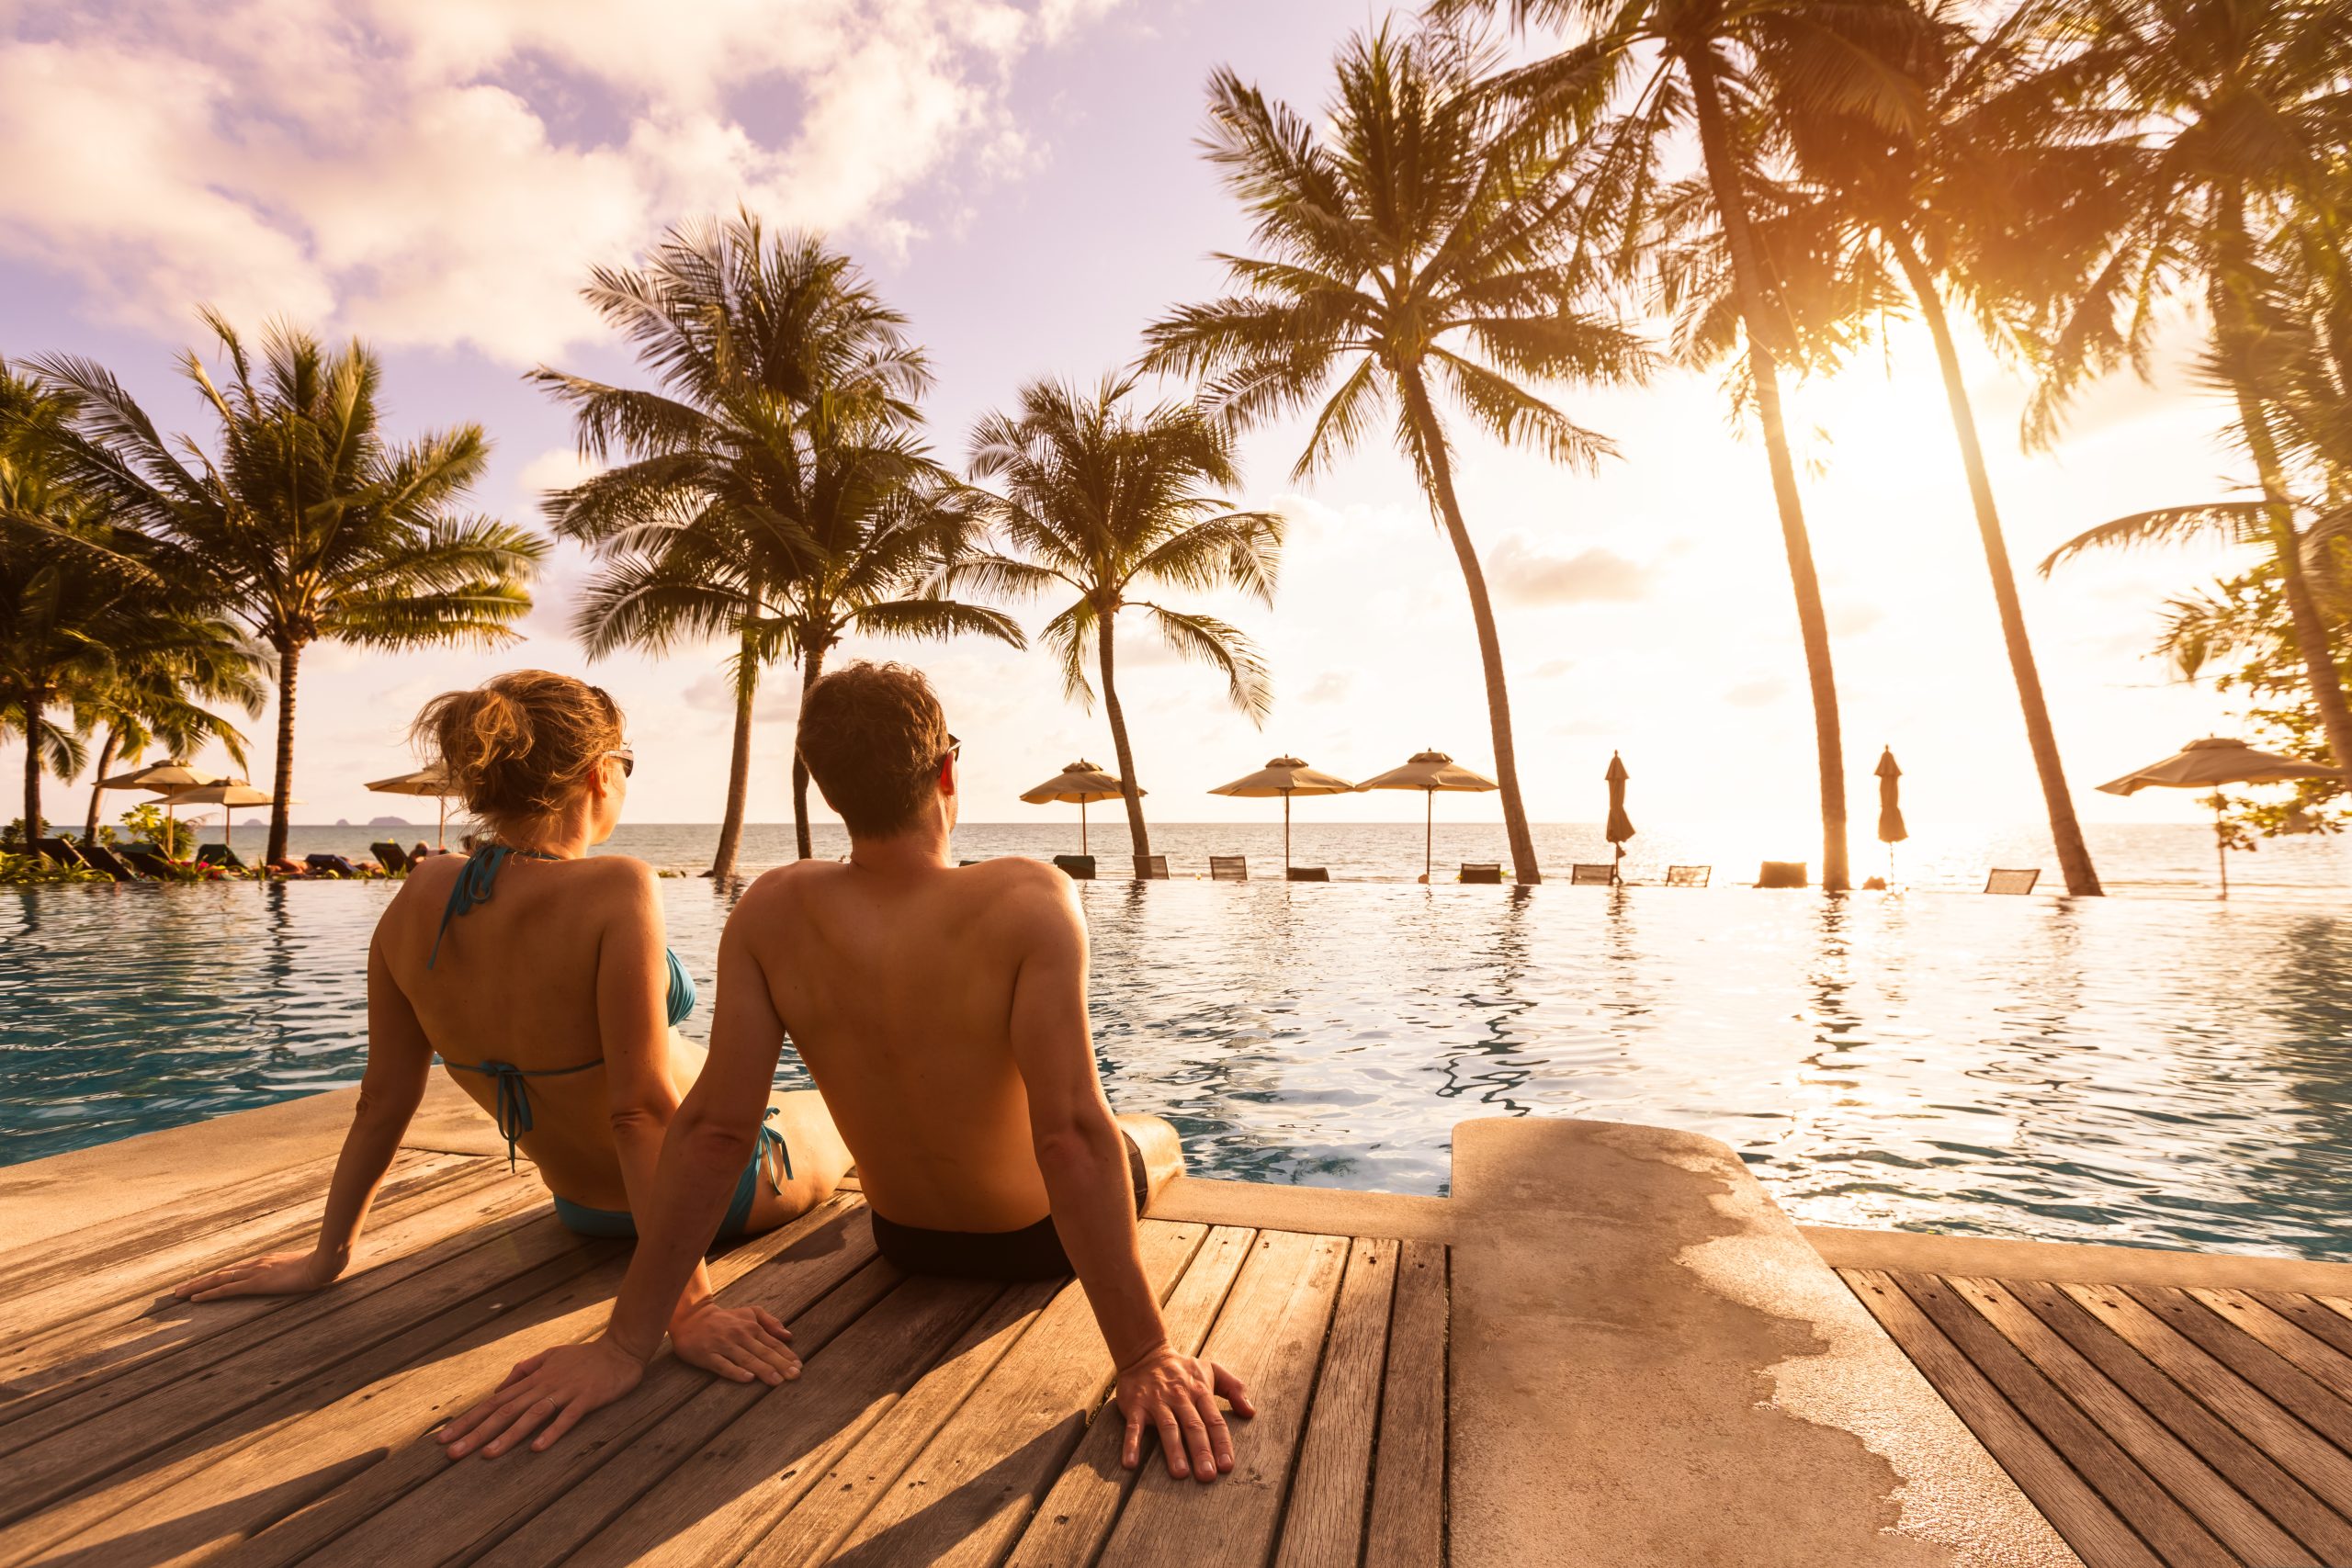 Couple sitting by resort pool at sunset, overlooking palm trees and the ocean.